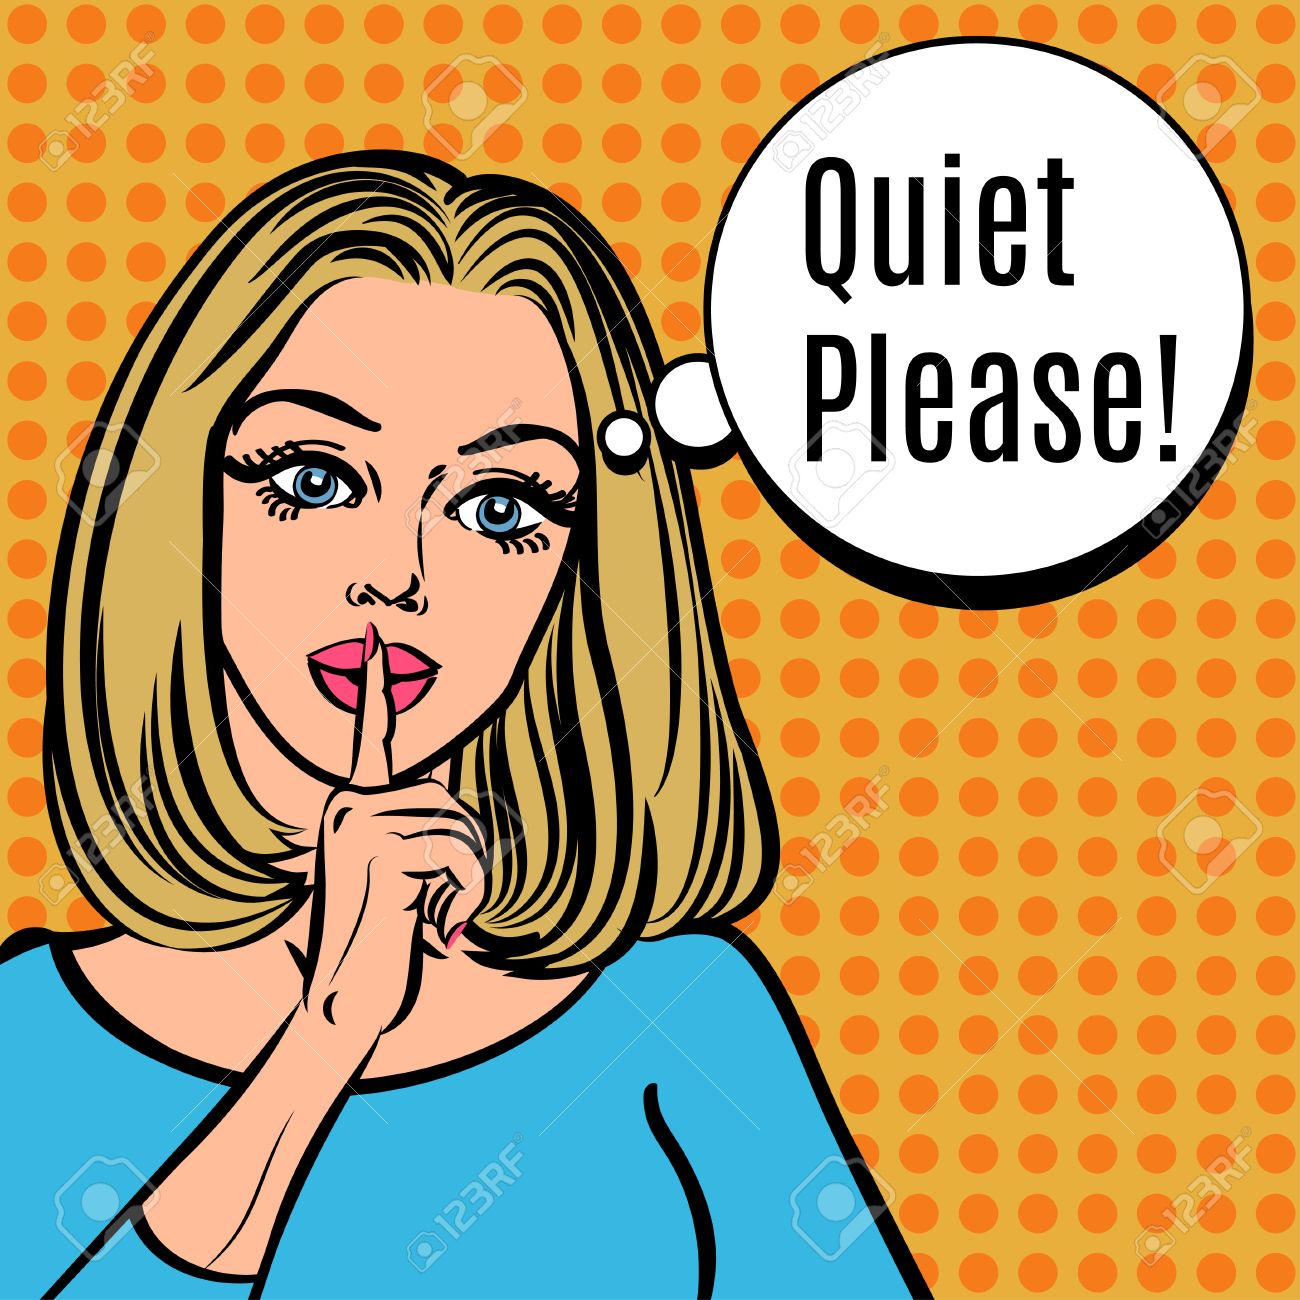 48770262-Girl-says-Quiet-Please-Vector-retro-woman-with-silence-sign-pop-art-comics-style-illustration-Girl-a-Stock-Vector.jpg